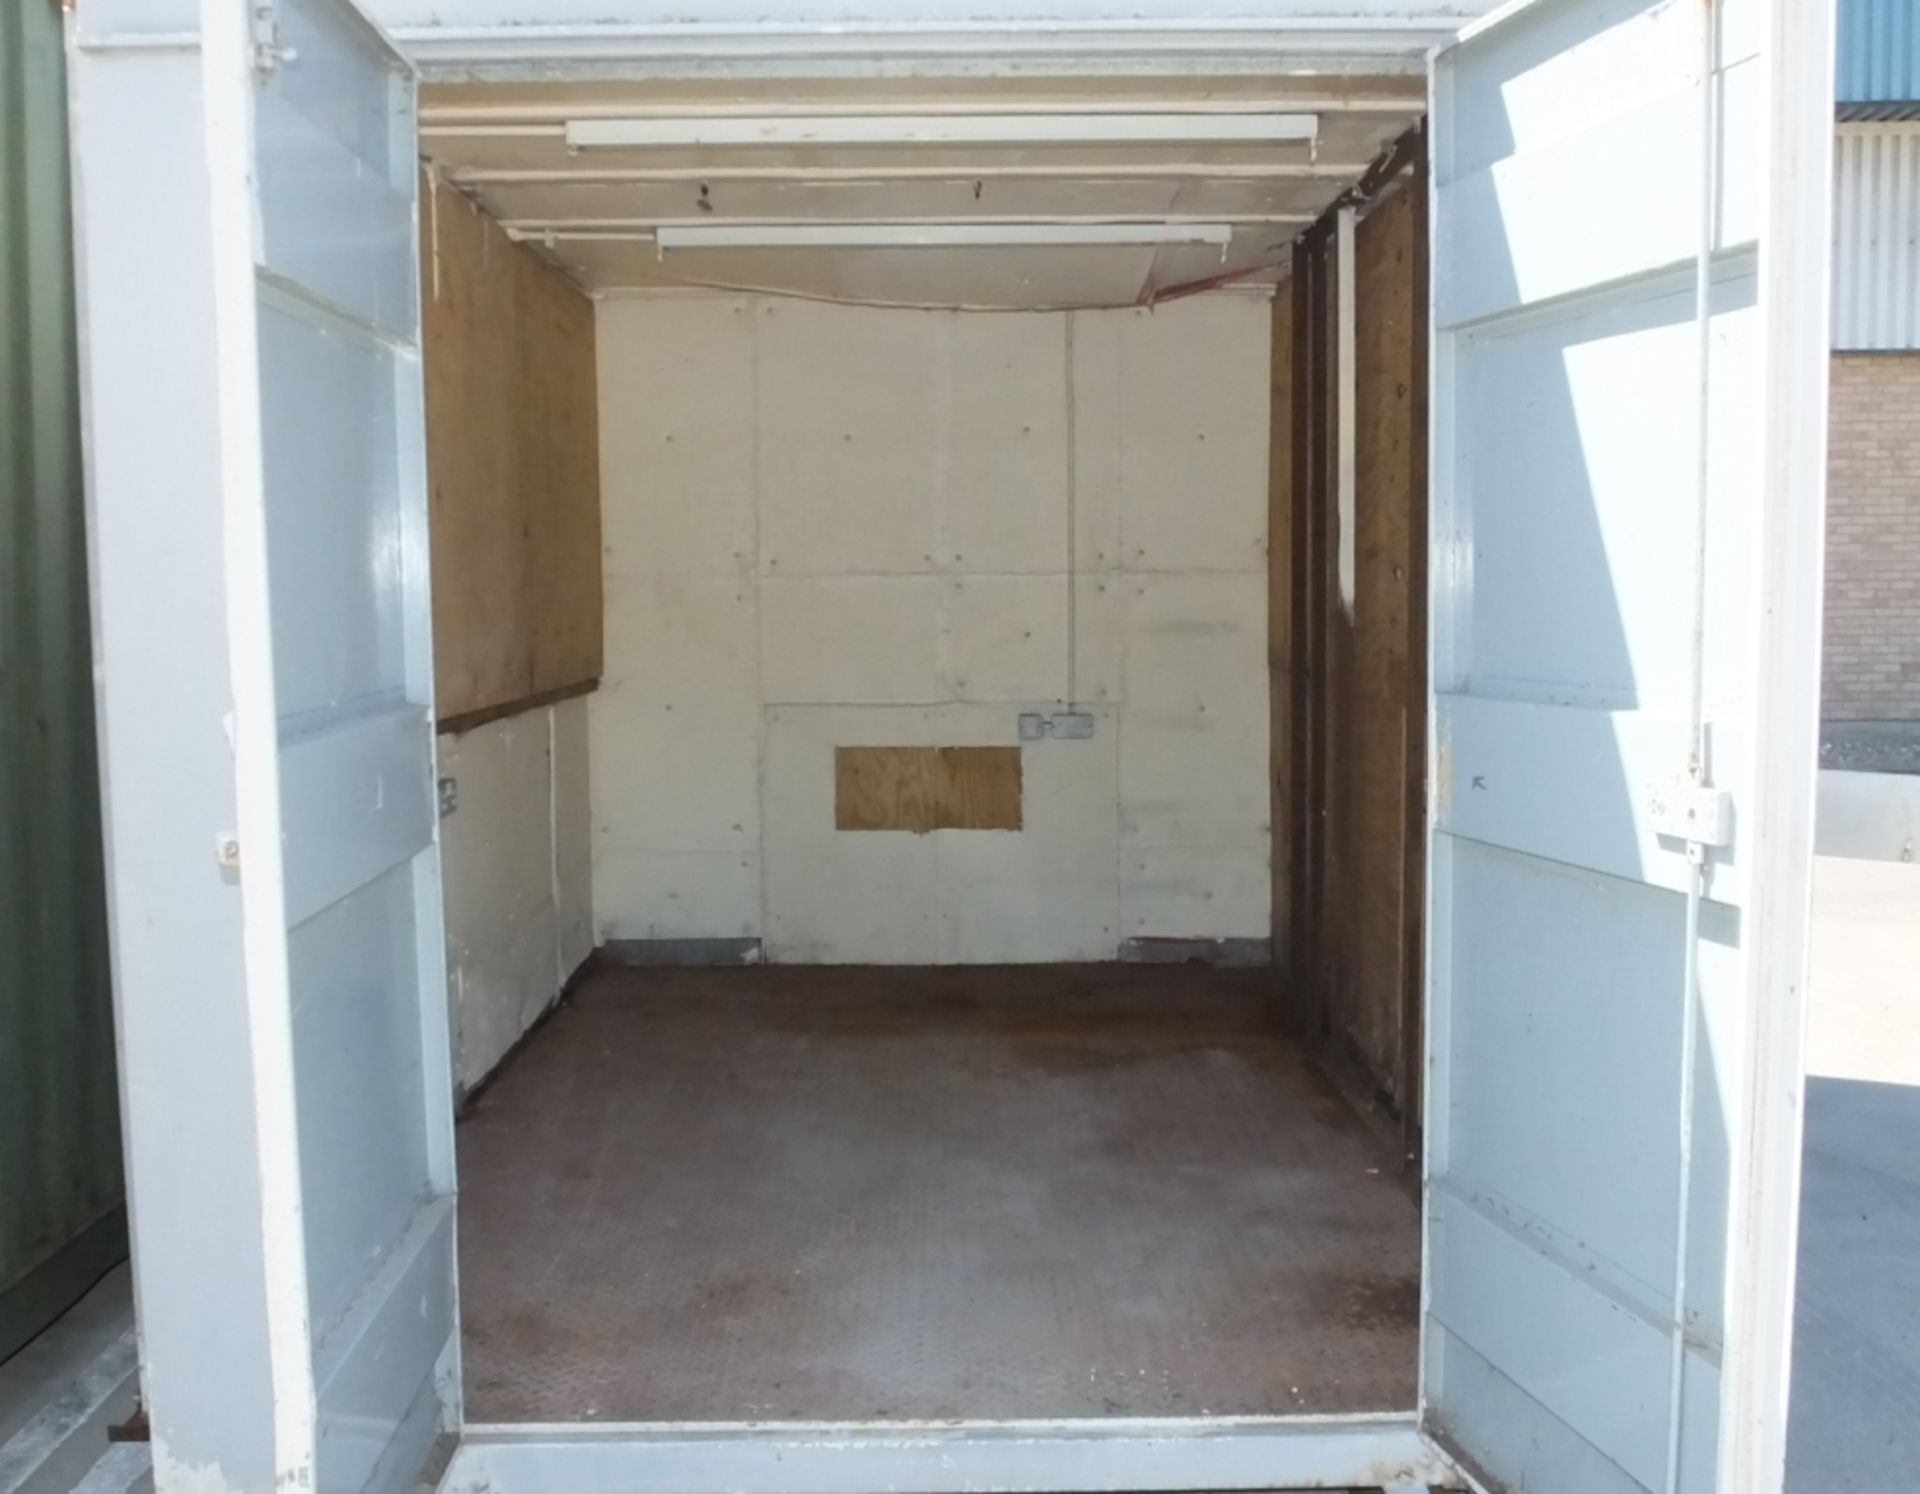 Mobag Shipping container 10ft x 8ft x 8ft - Image 3 of 4